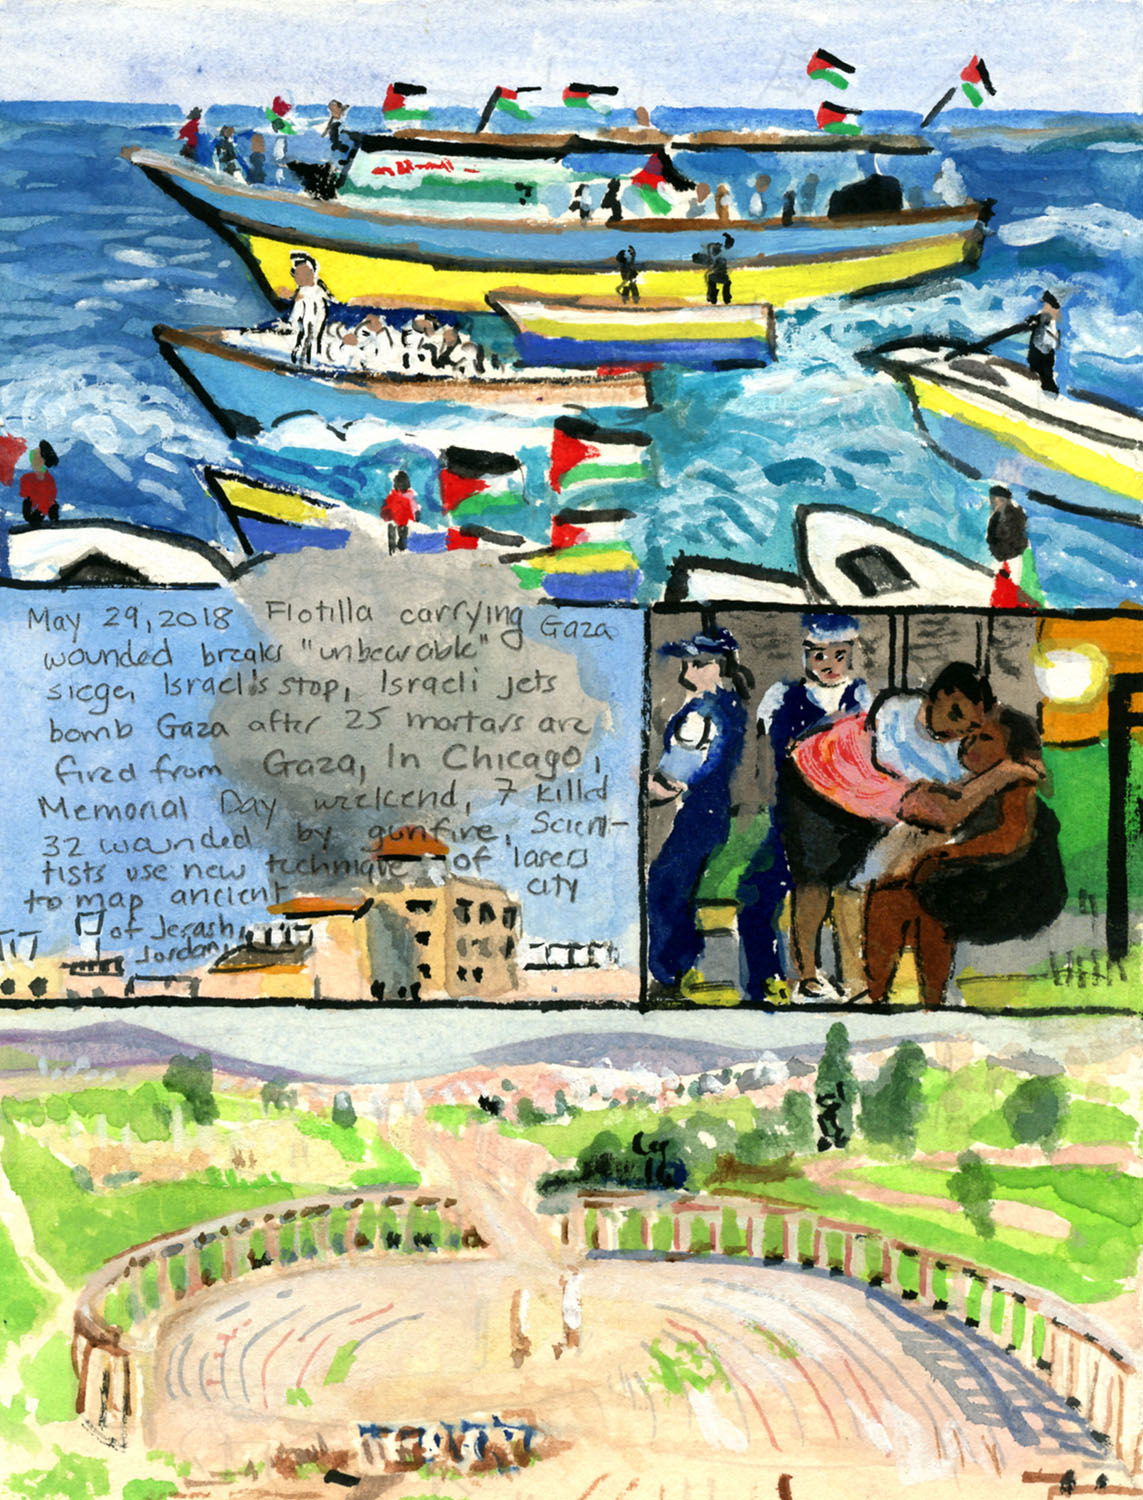 Day 920 (May 29, 2018) <br>Watercolor, gouache, graphite on paper, 7 ½ x 5 ¾ in. <br><i>Flotilla carrying Gaza wounded breaks “unbearable” siege, Israelis stop, Israeli jets bomb Gaza after 25 mortars are fired from Gaza, In Chicago, Memorial Day weekend, 7 killed, 32 wounded by gunfire, Scientists use new technique of lasers to map ancient city of Jerash, Jordan.</i>